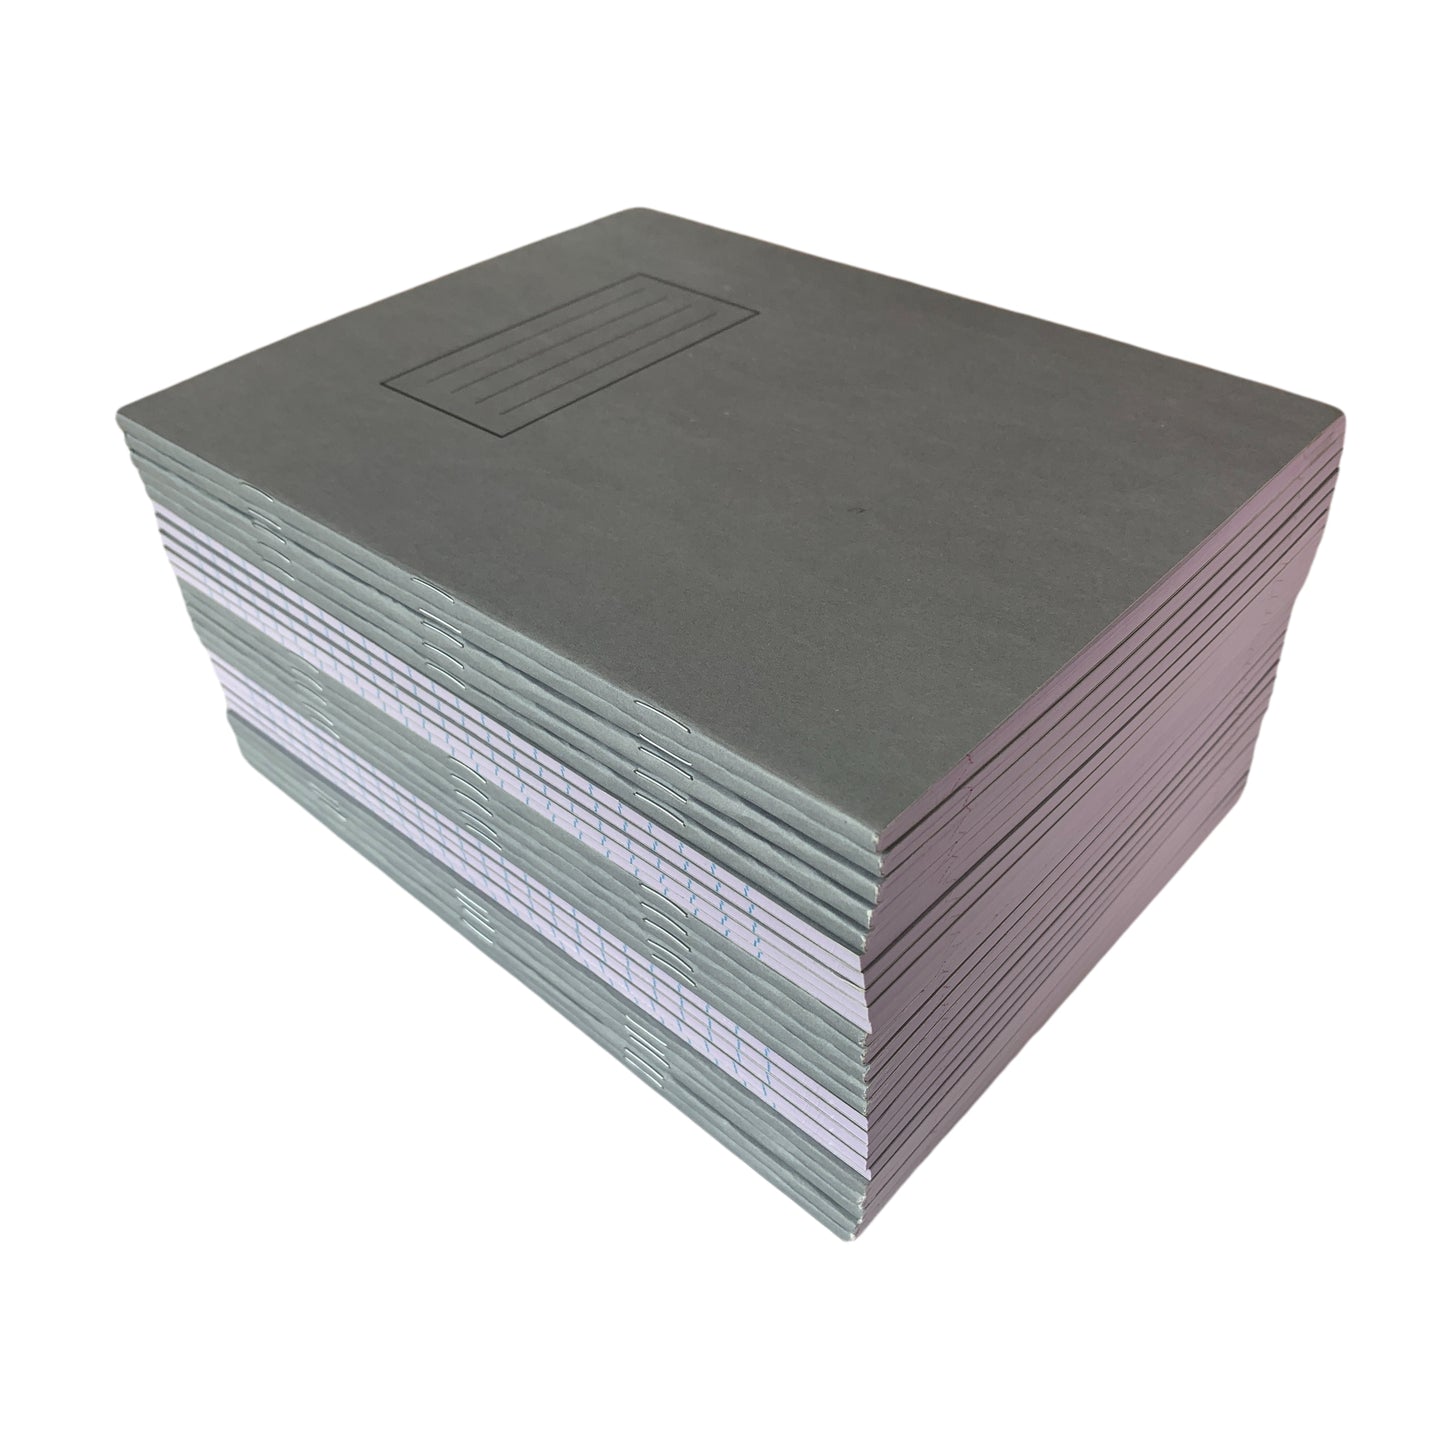 Janrax 9x7" Grey 80 Pages Feint and Ruled Exercise Book